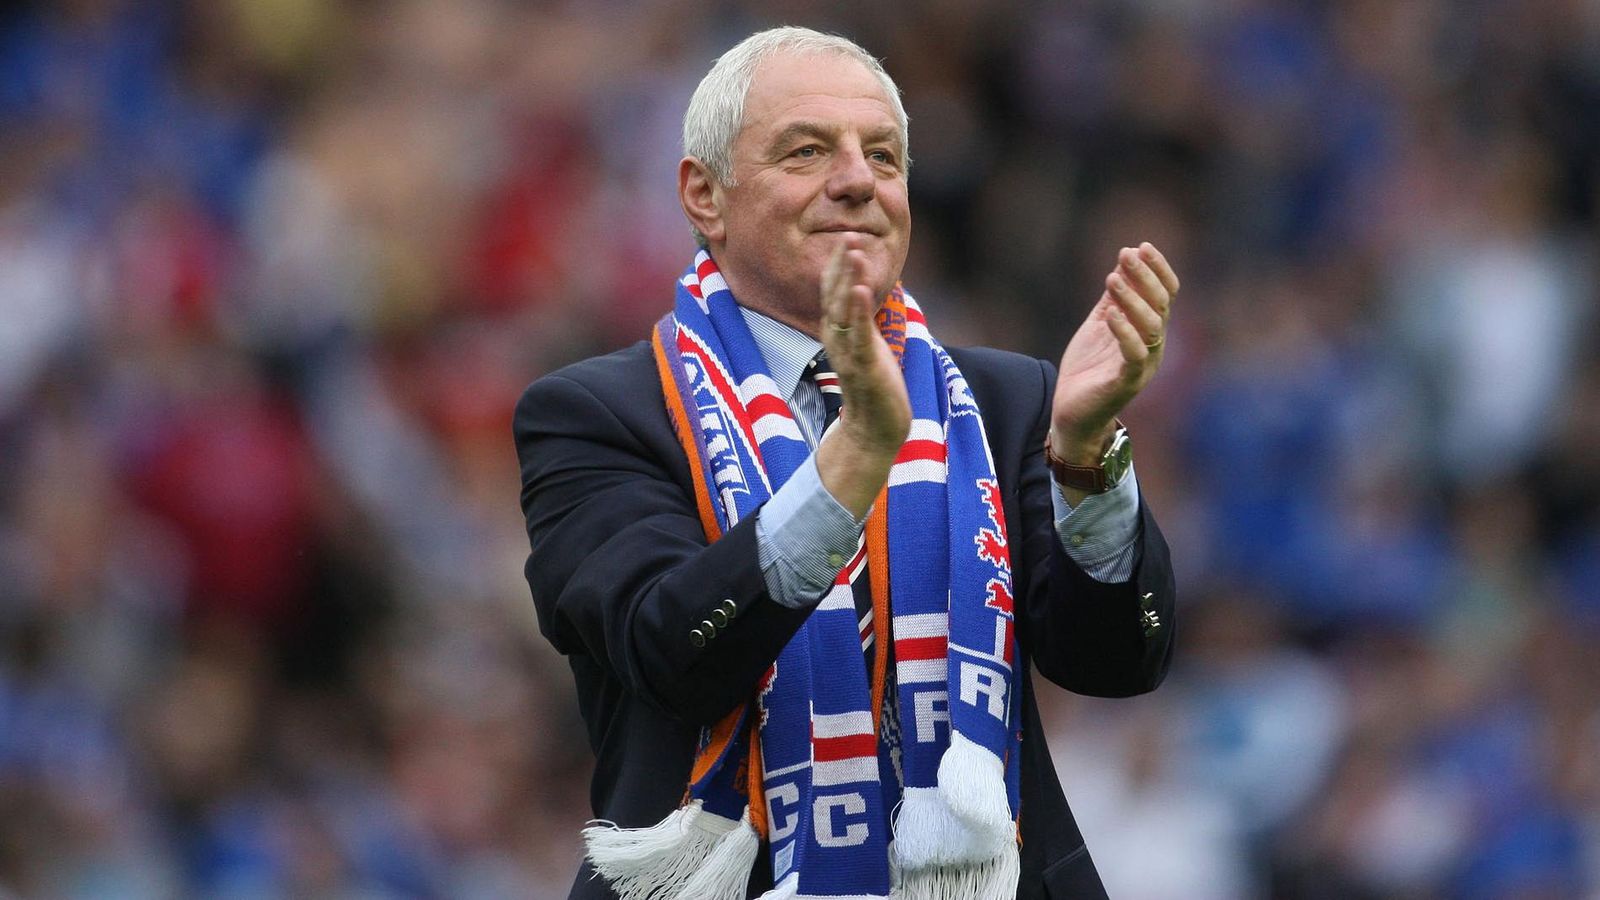 walter-smith-rangers-commission-statue-of-legendary-manager-on-first-anniversary-of-his-passing